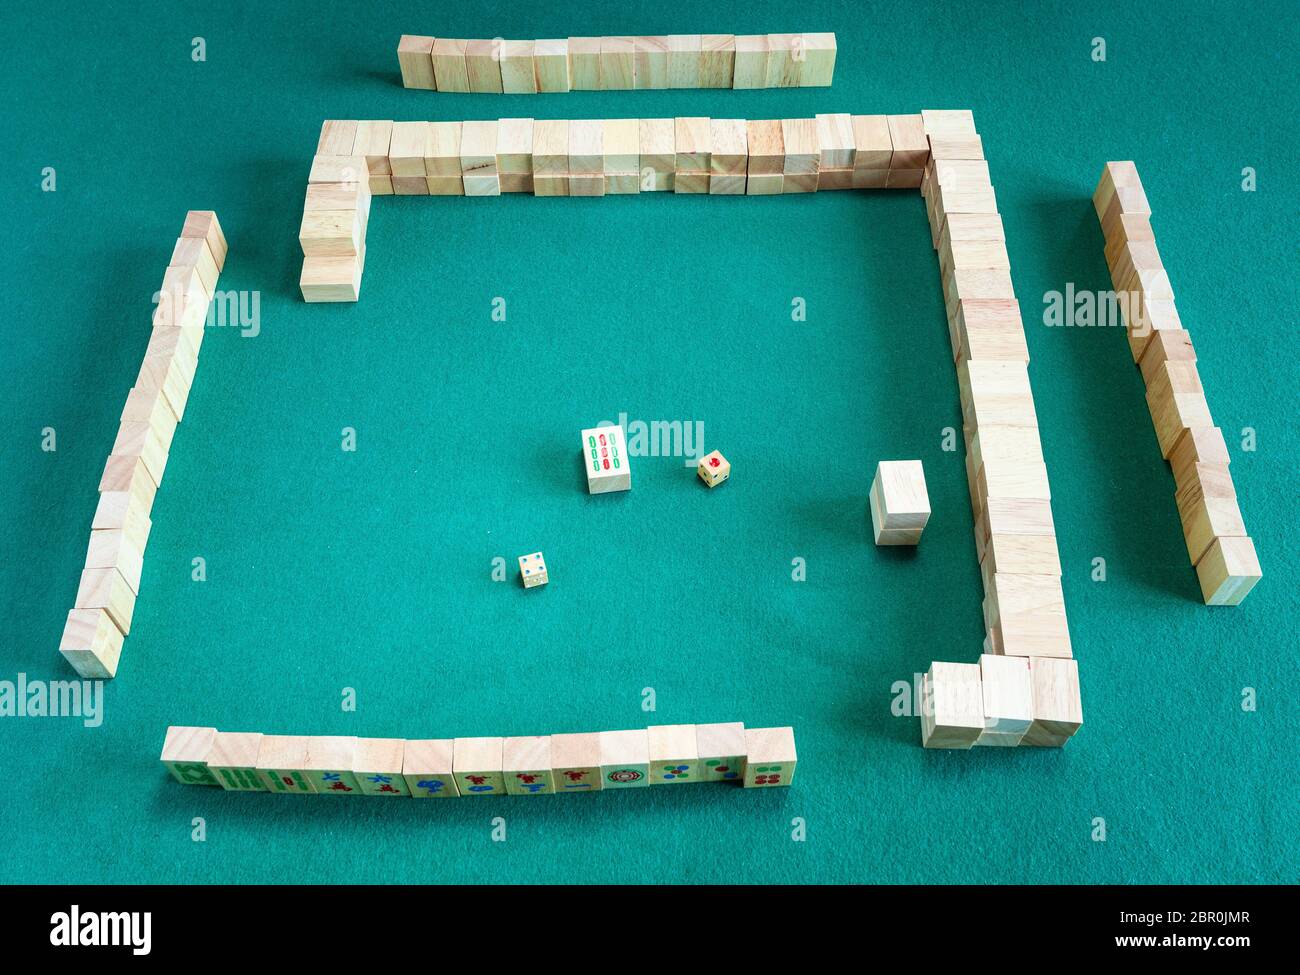 beginning of play of mahjong (disassembling the wall), tile-based chinese strategy board game on green baize table Stock Photo